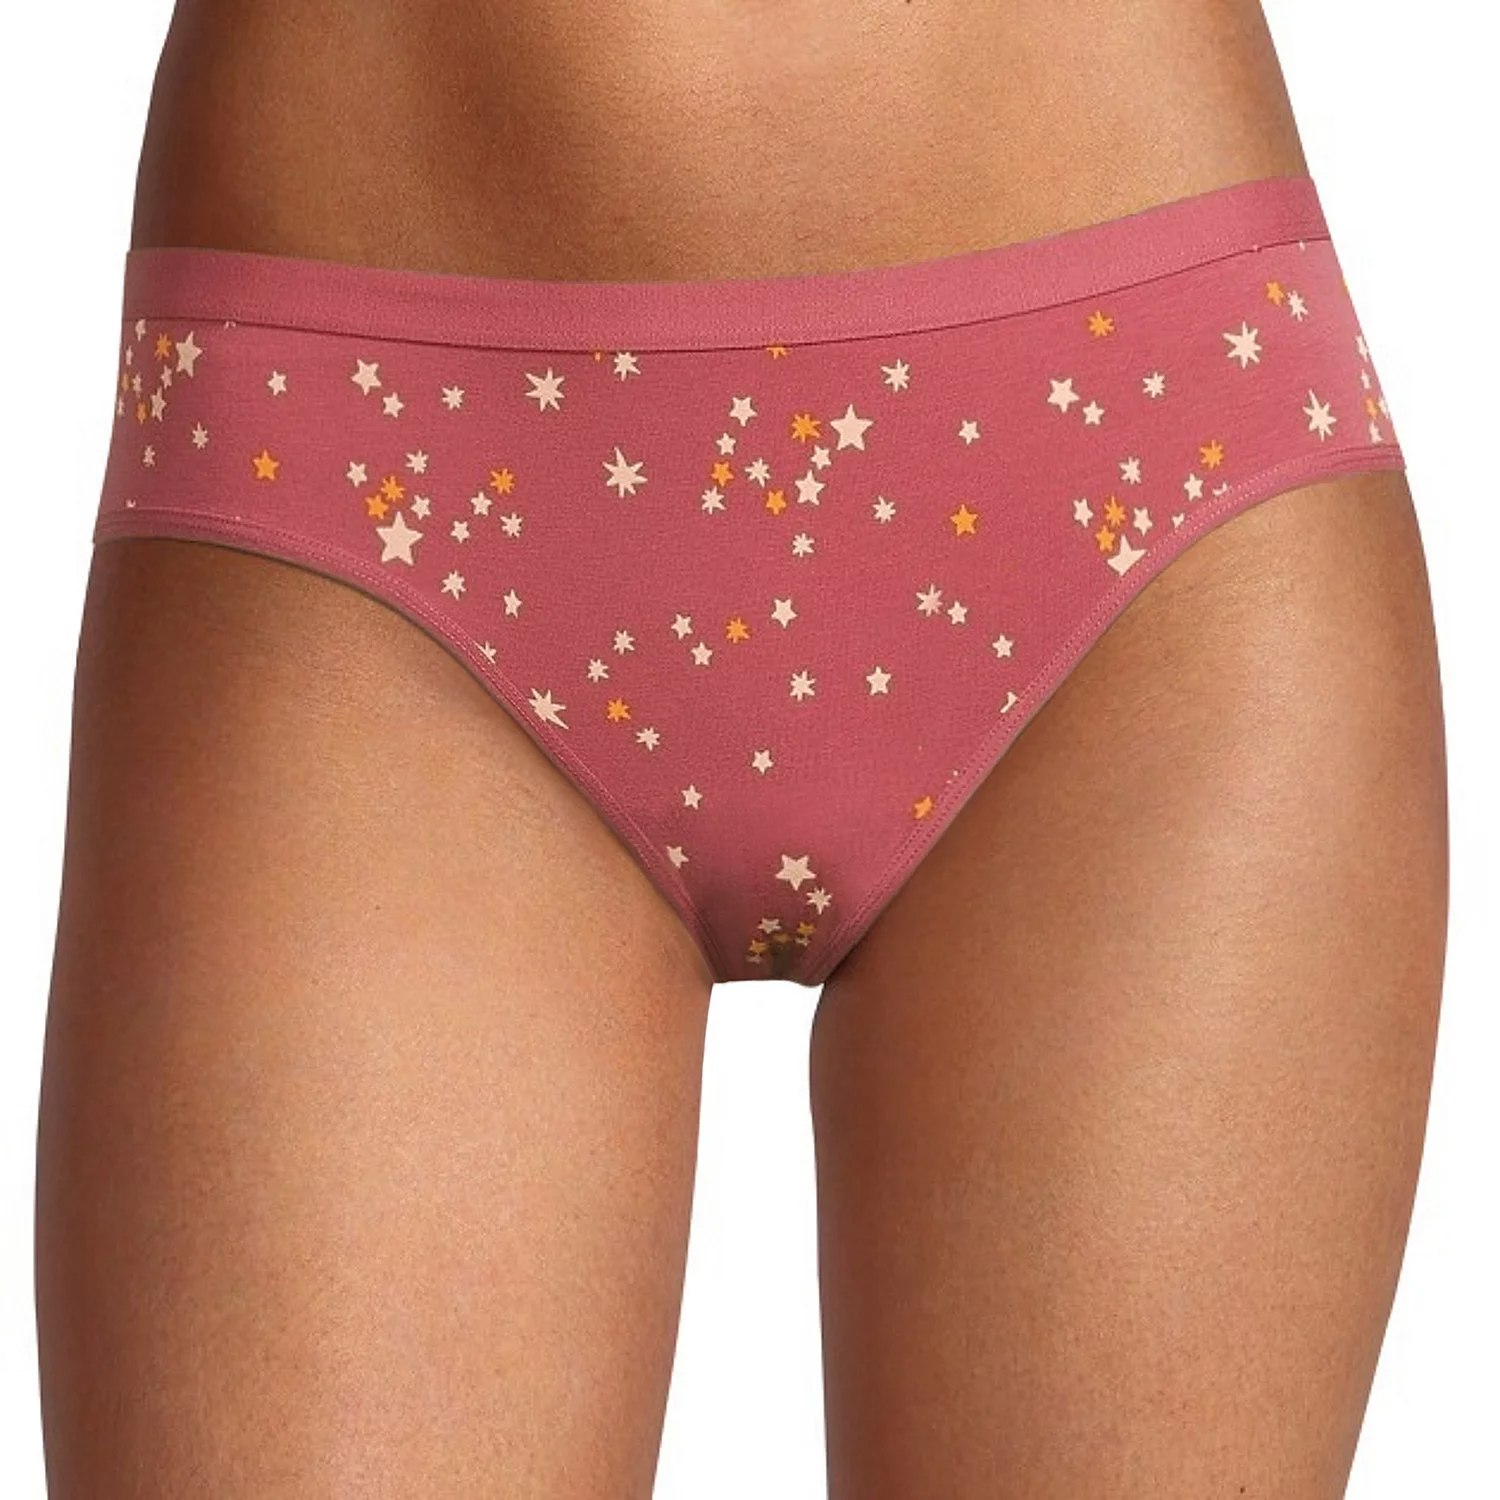 A pair of mauve underwear with a pattern of white and yellow stars is depicted.